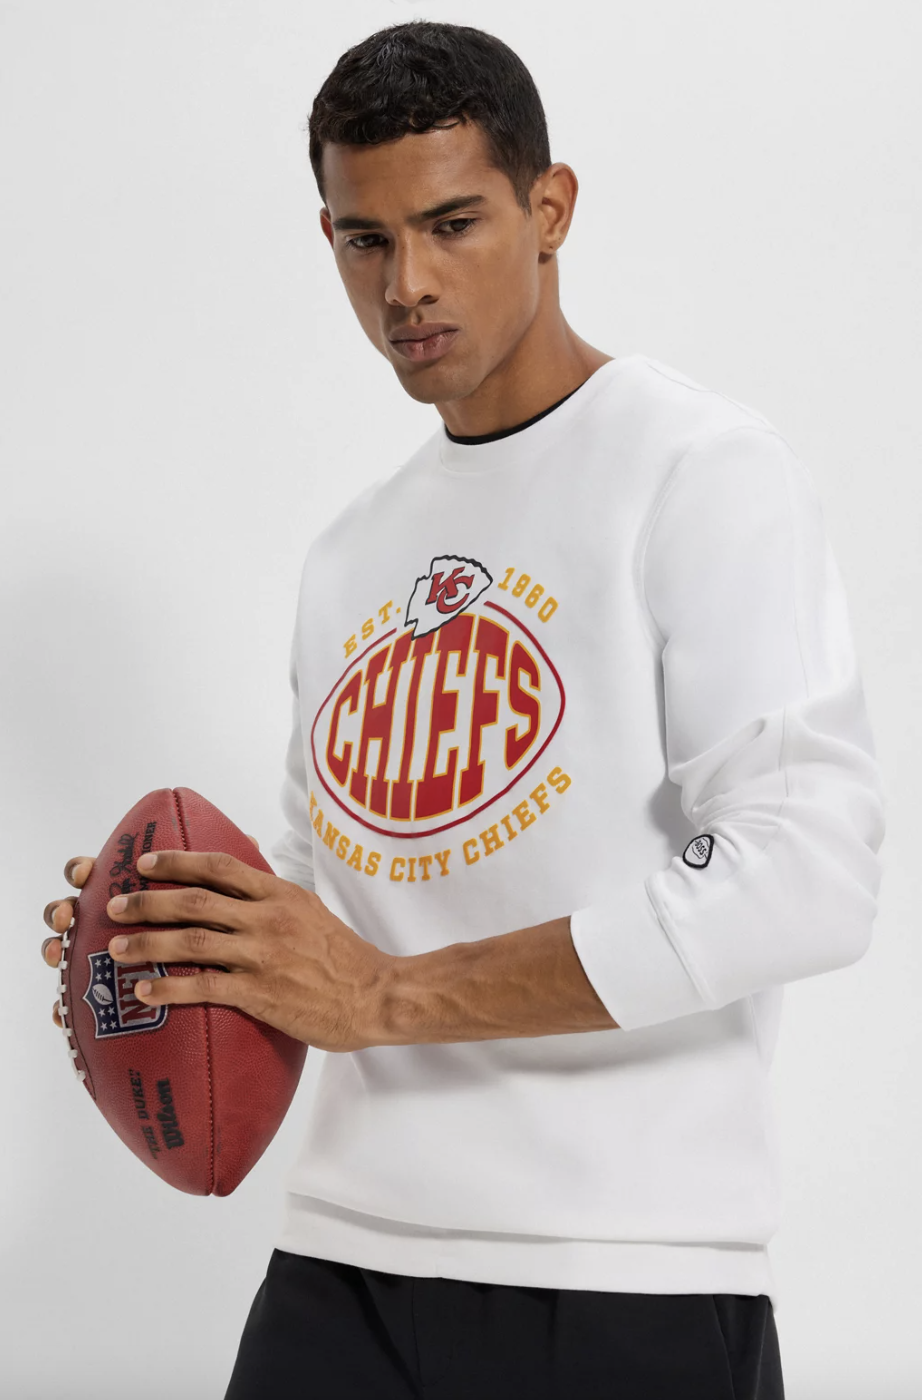 SUPERBOWL STYLE🏈 Go Chiefs! We are definitely in our CHIEFS Era. Limited  Supply of sweatshirts and trucker hats. Call 573-803- to reserve yours!🙌  #chiefskingdom #kcchiefs #swiftfans #swifty #superbowllsunday #superbowl  #superbowlstyle #gameday